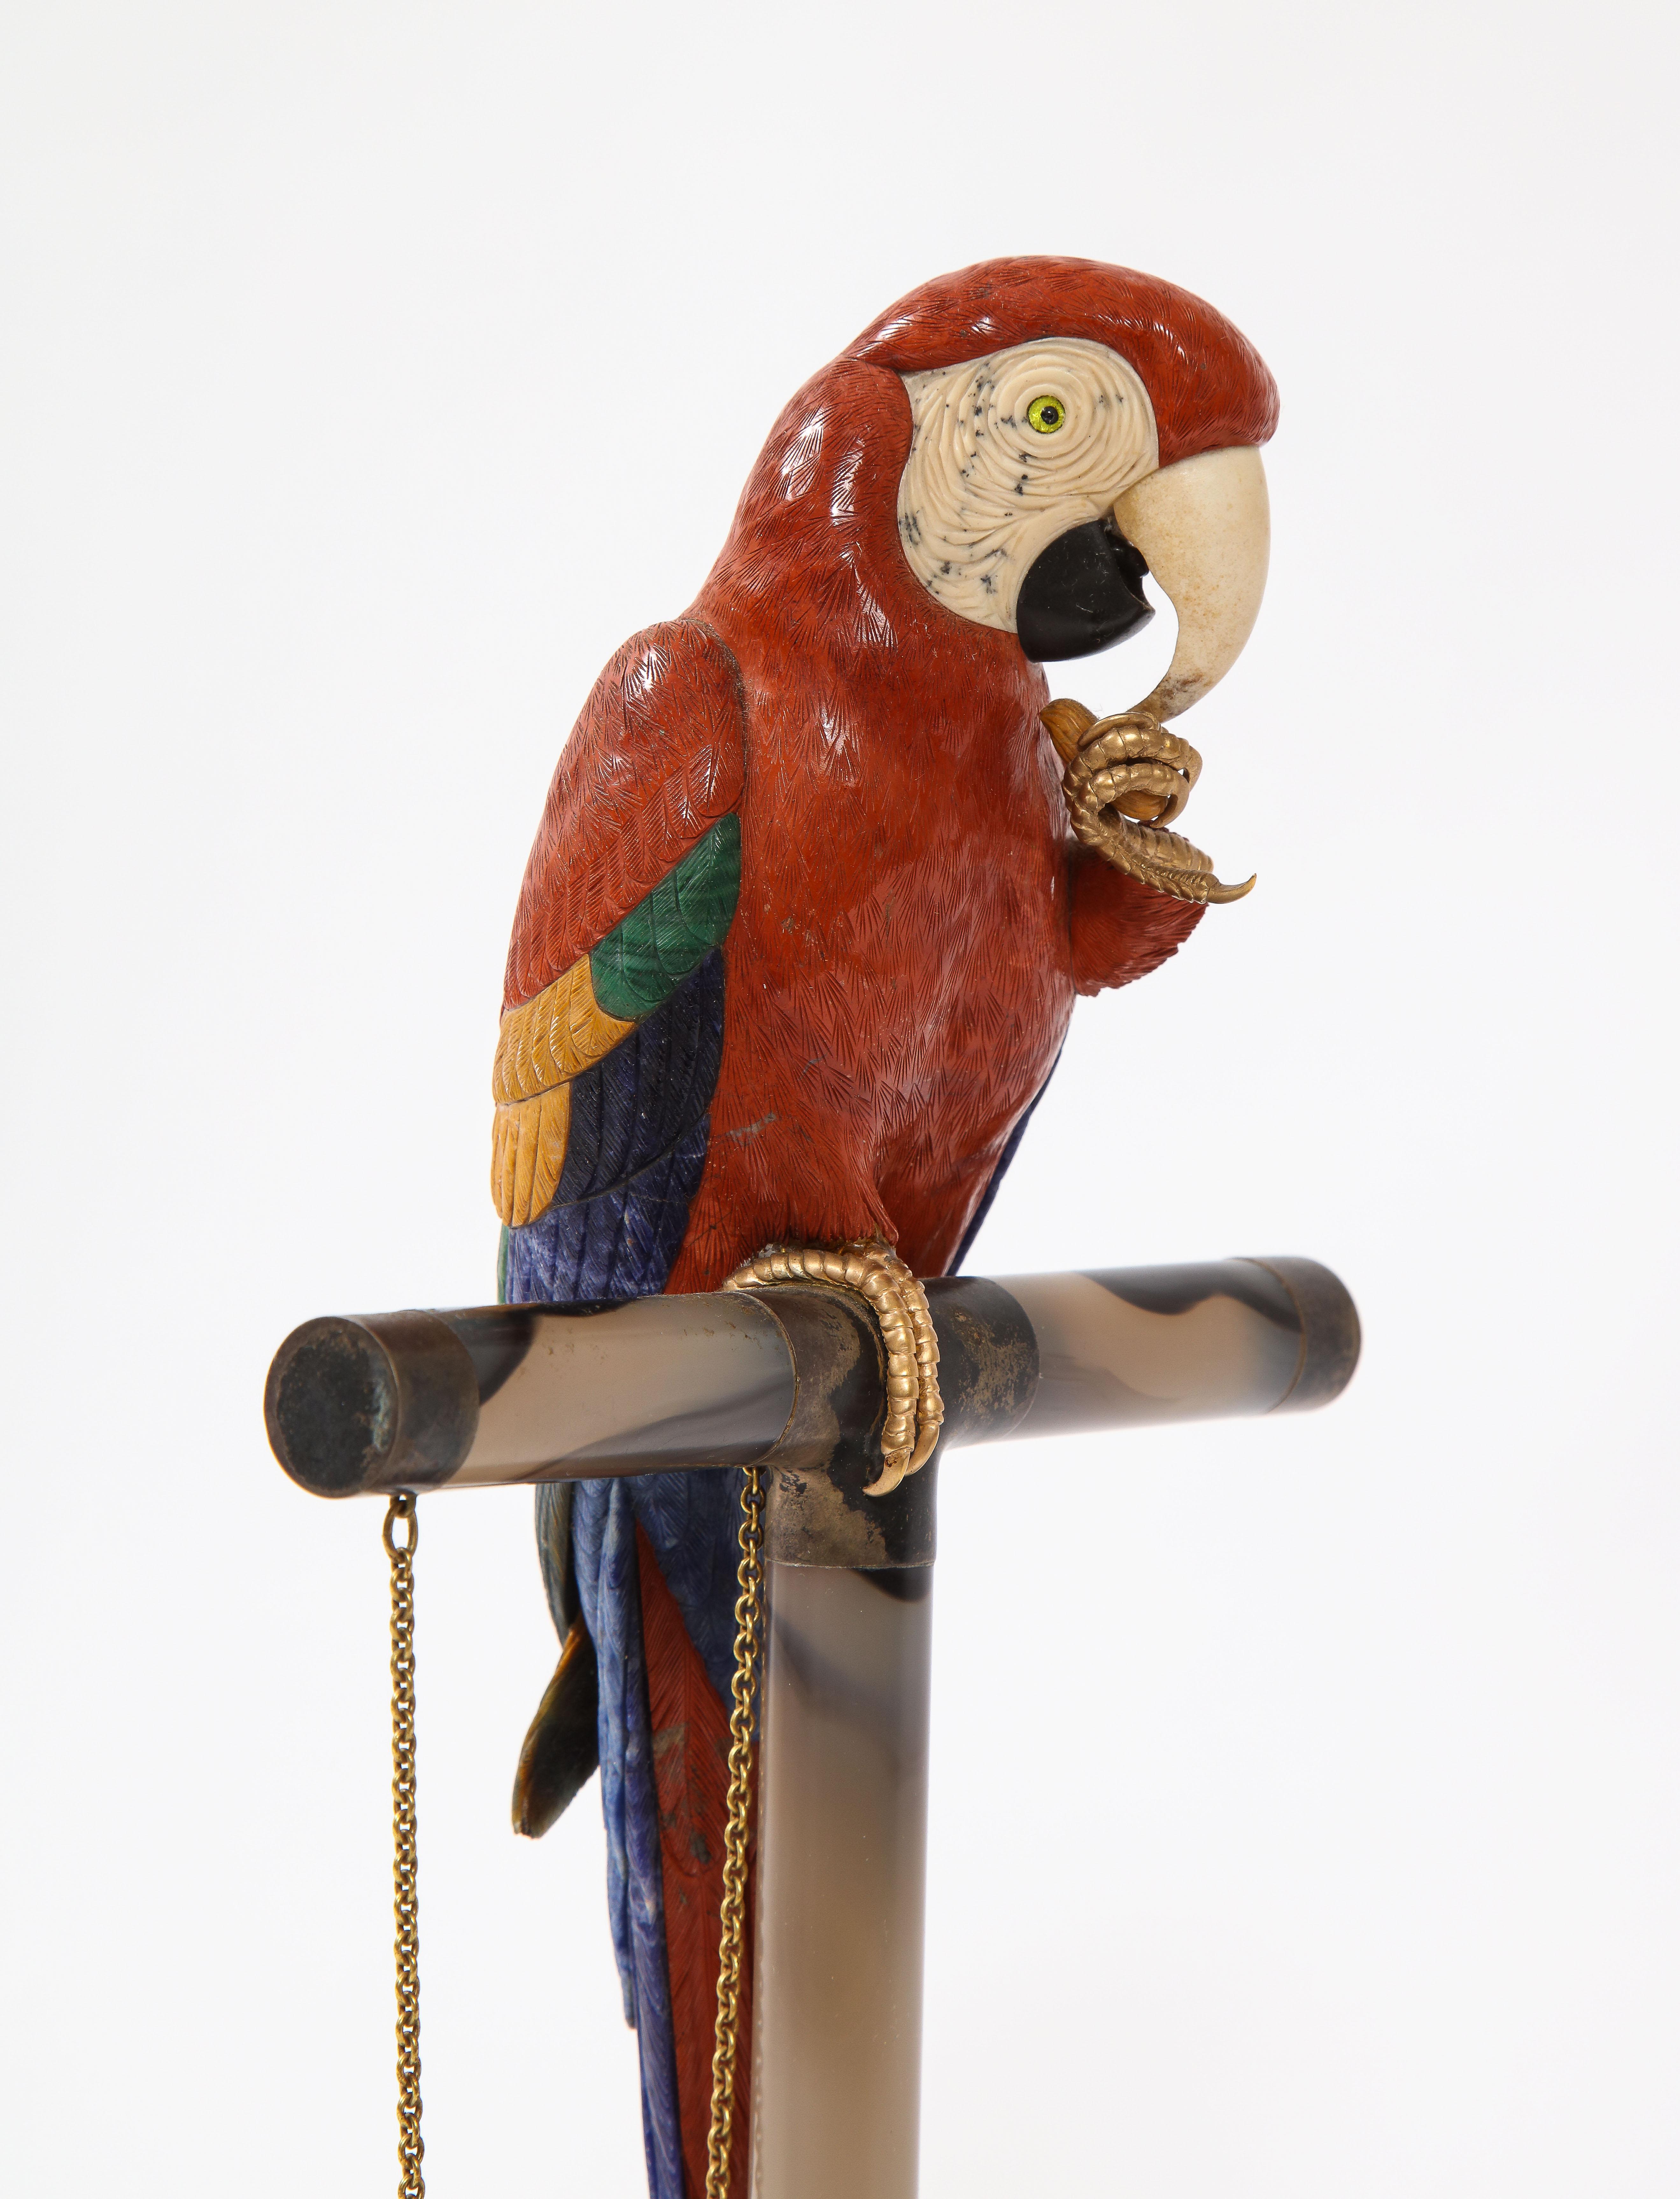 Semi Precious Stone & Metal Model of a Scarlet Macaw Parrot, P. Müller, Swiss 1